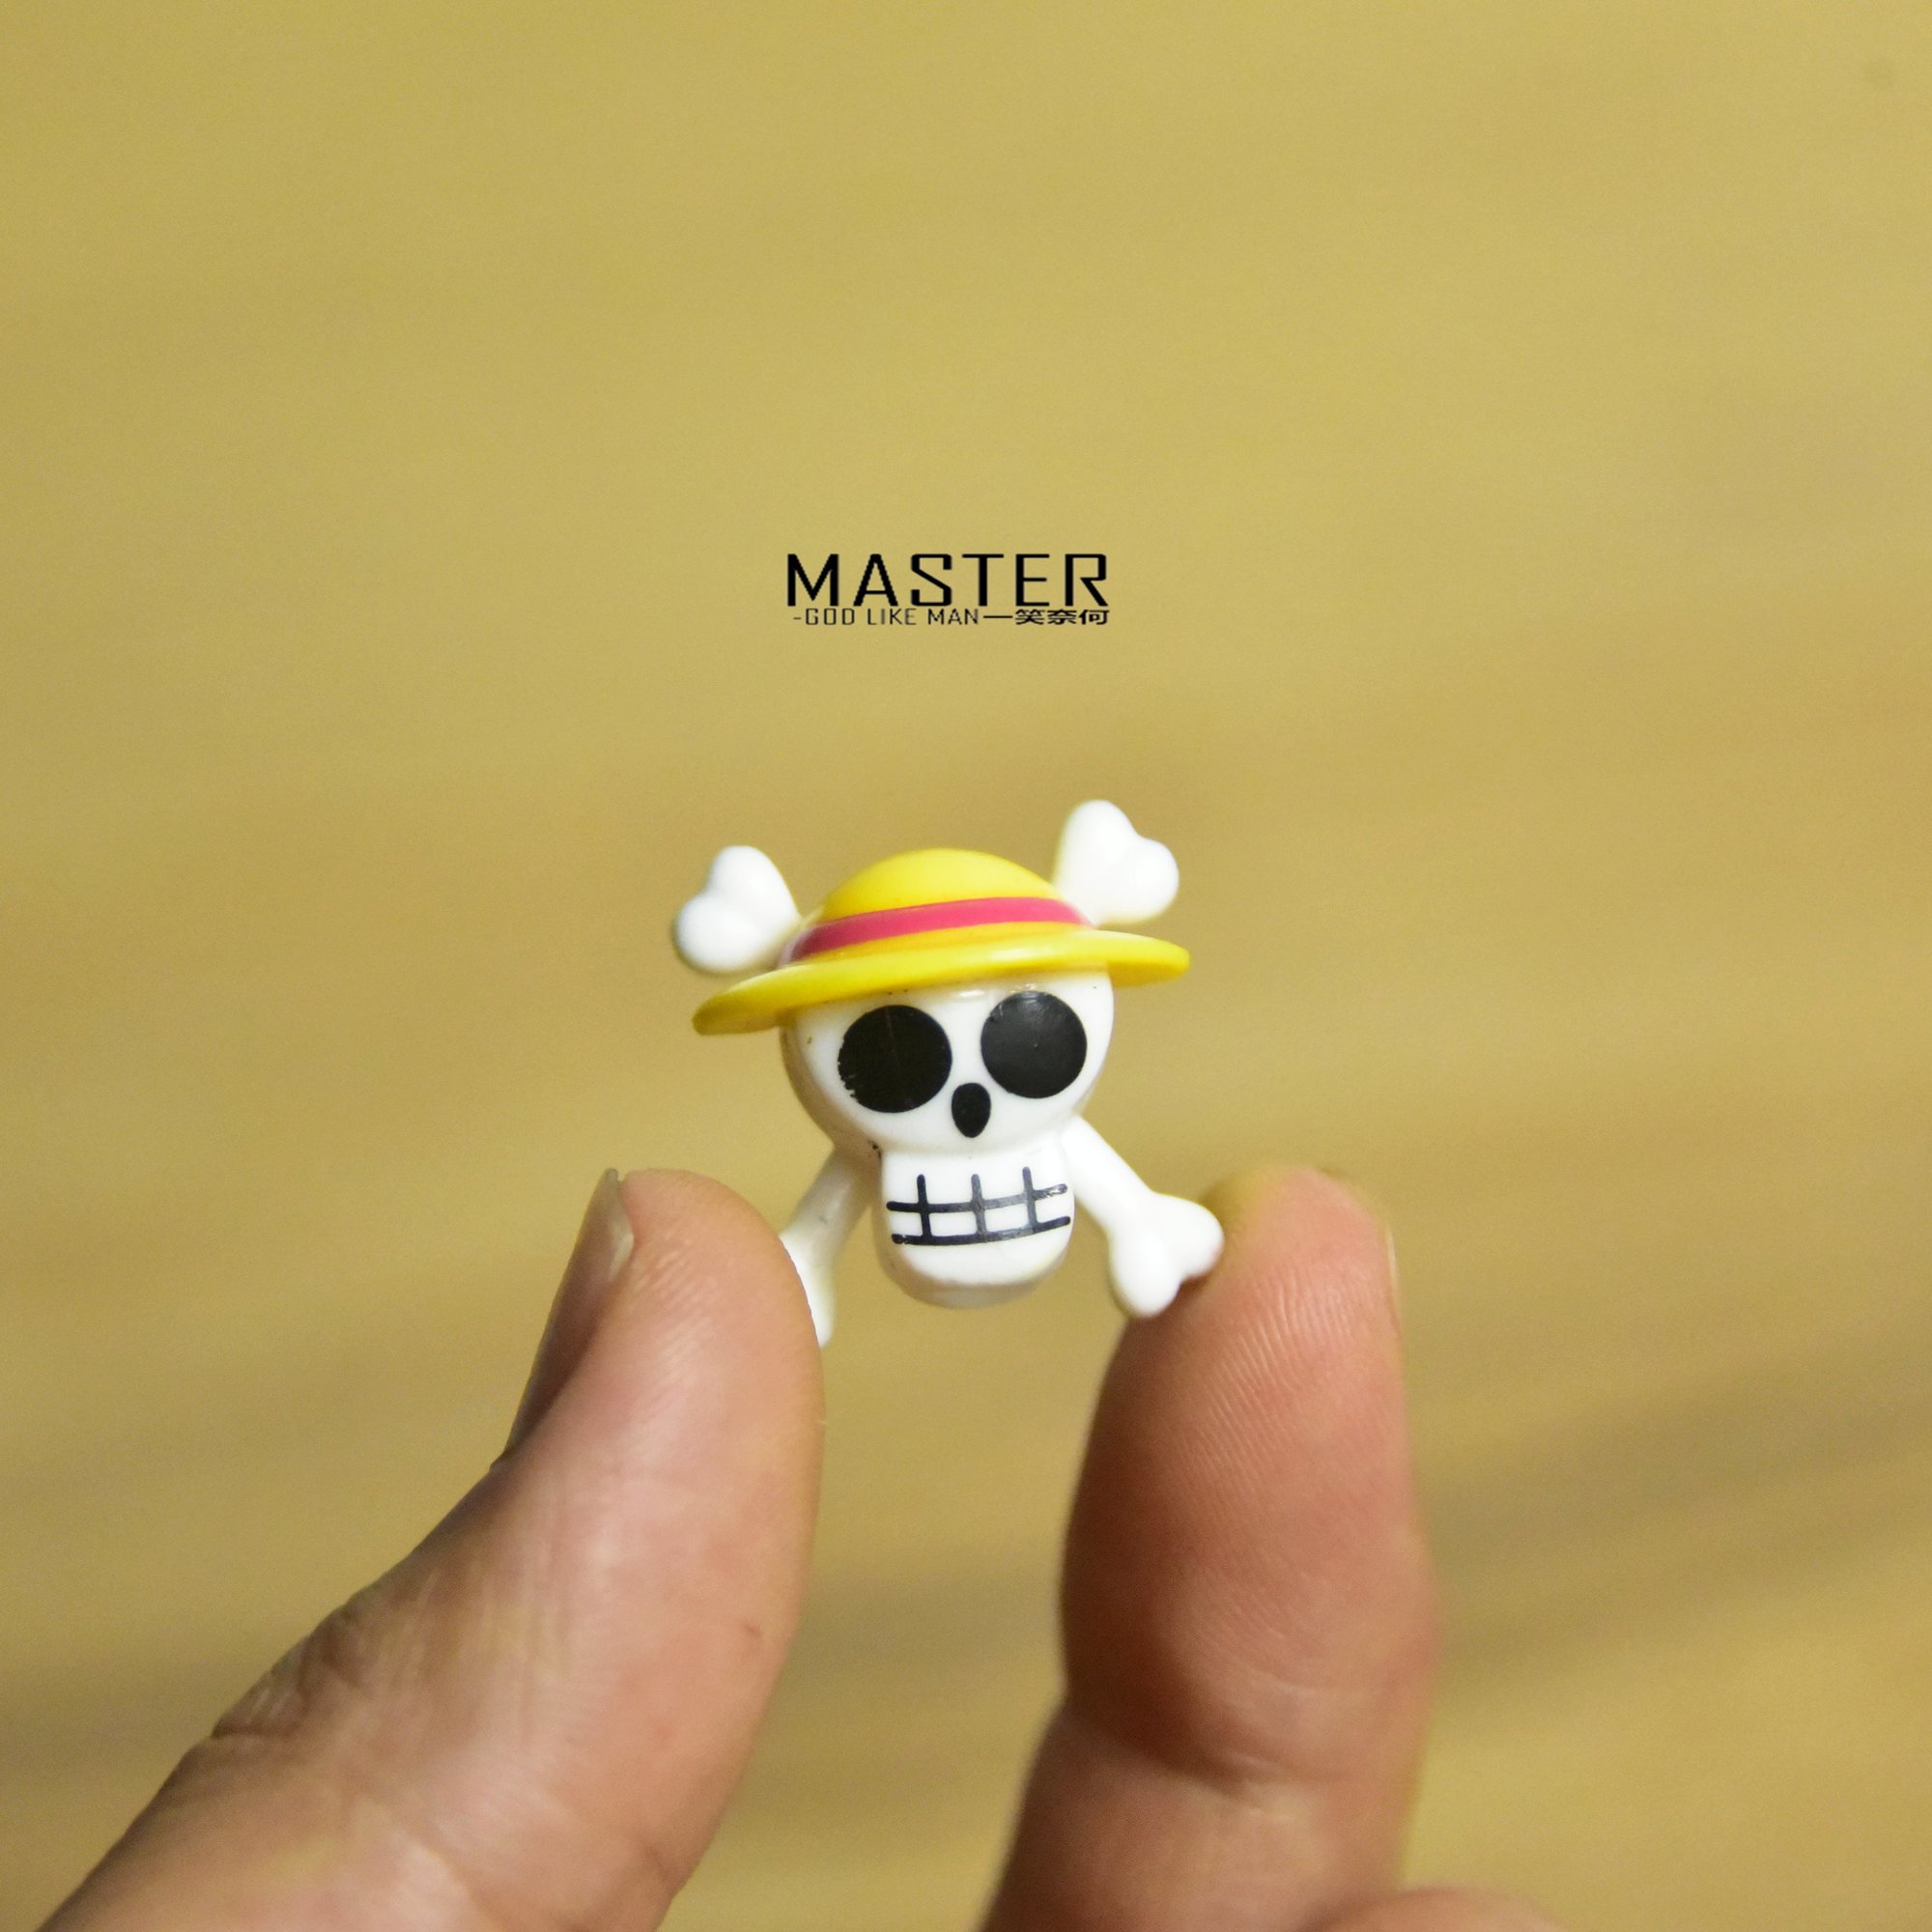 ONE PIECE Monkey D Luffy Pirate Flag Sign Mini Action Figure Model Ornaments Toys 3 - One Piece Figure